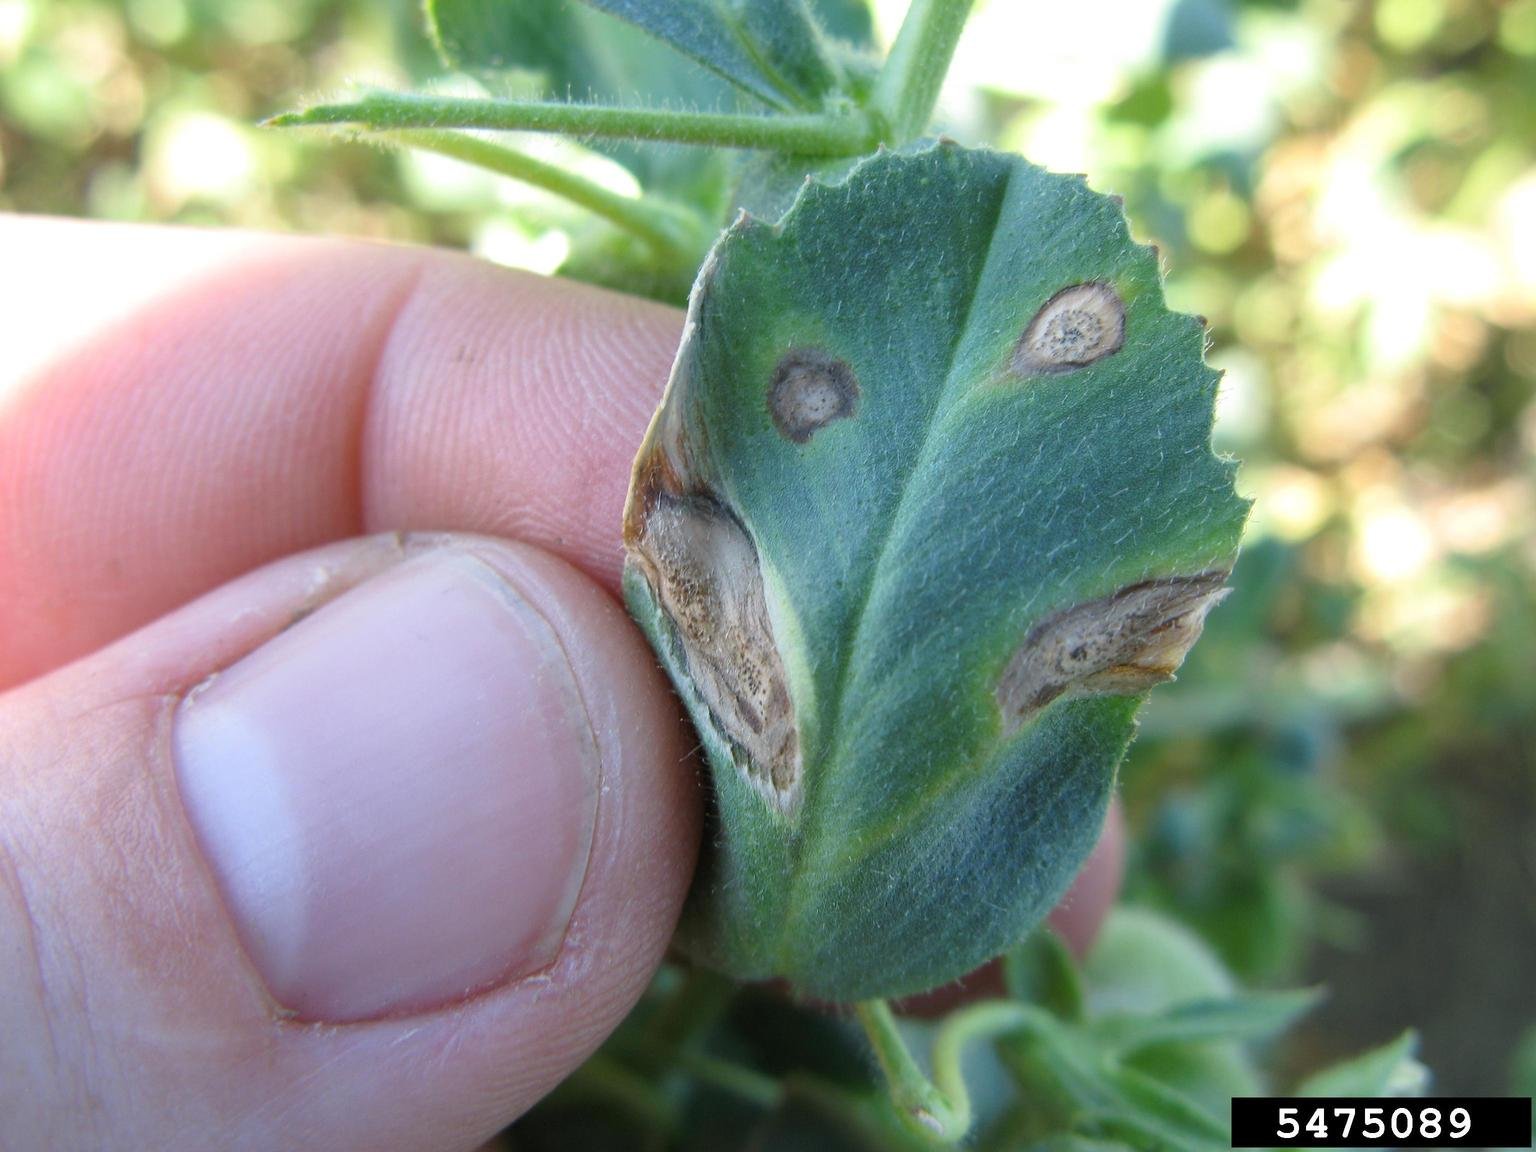 Pea Ascochyta Treatment: Managing Symptoms Of Peas With Ascochyta Blight |  Gardening Know How